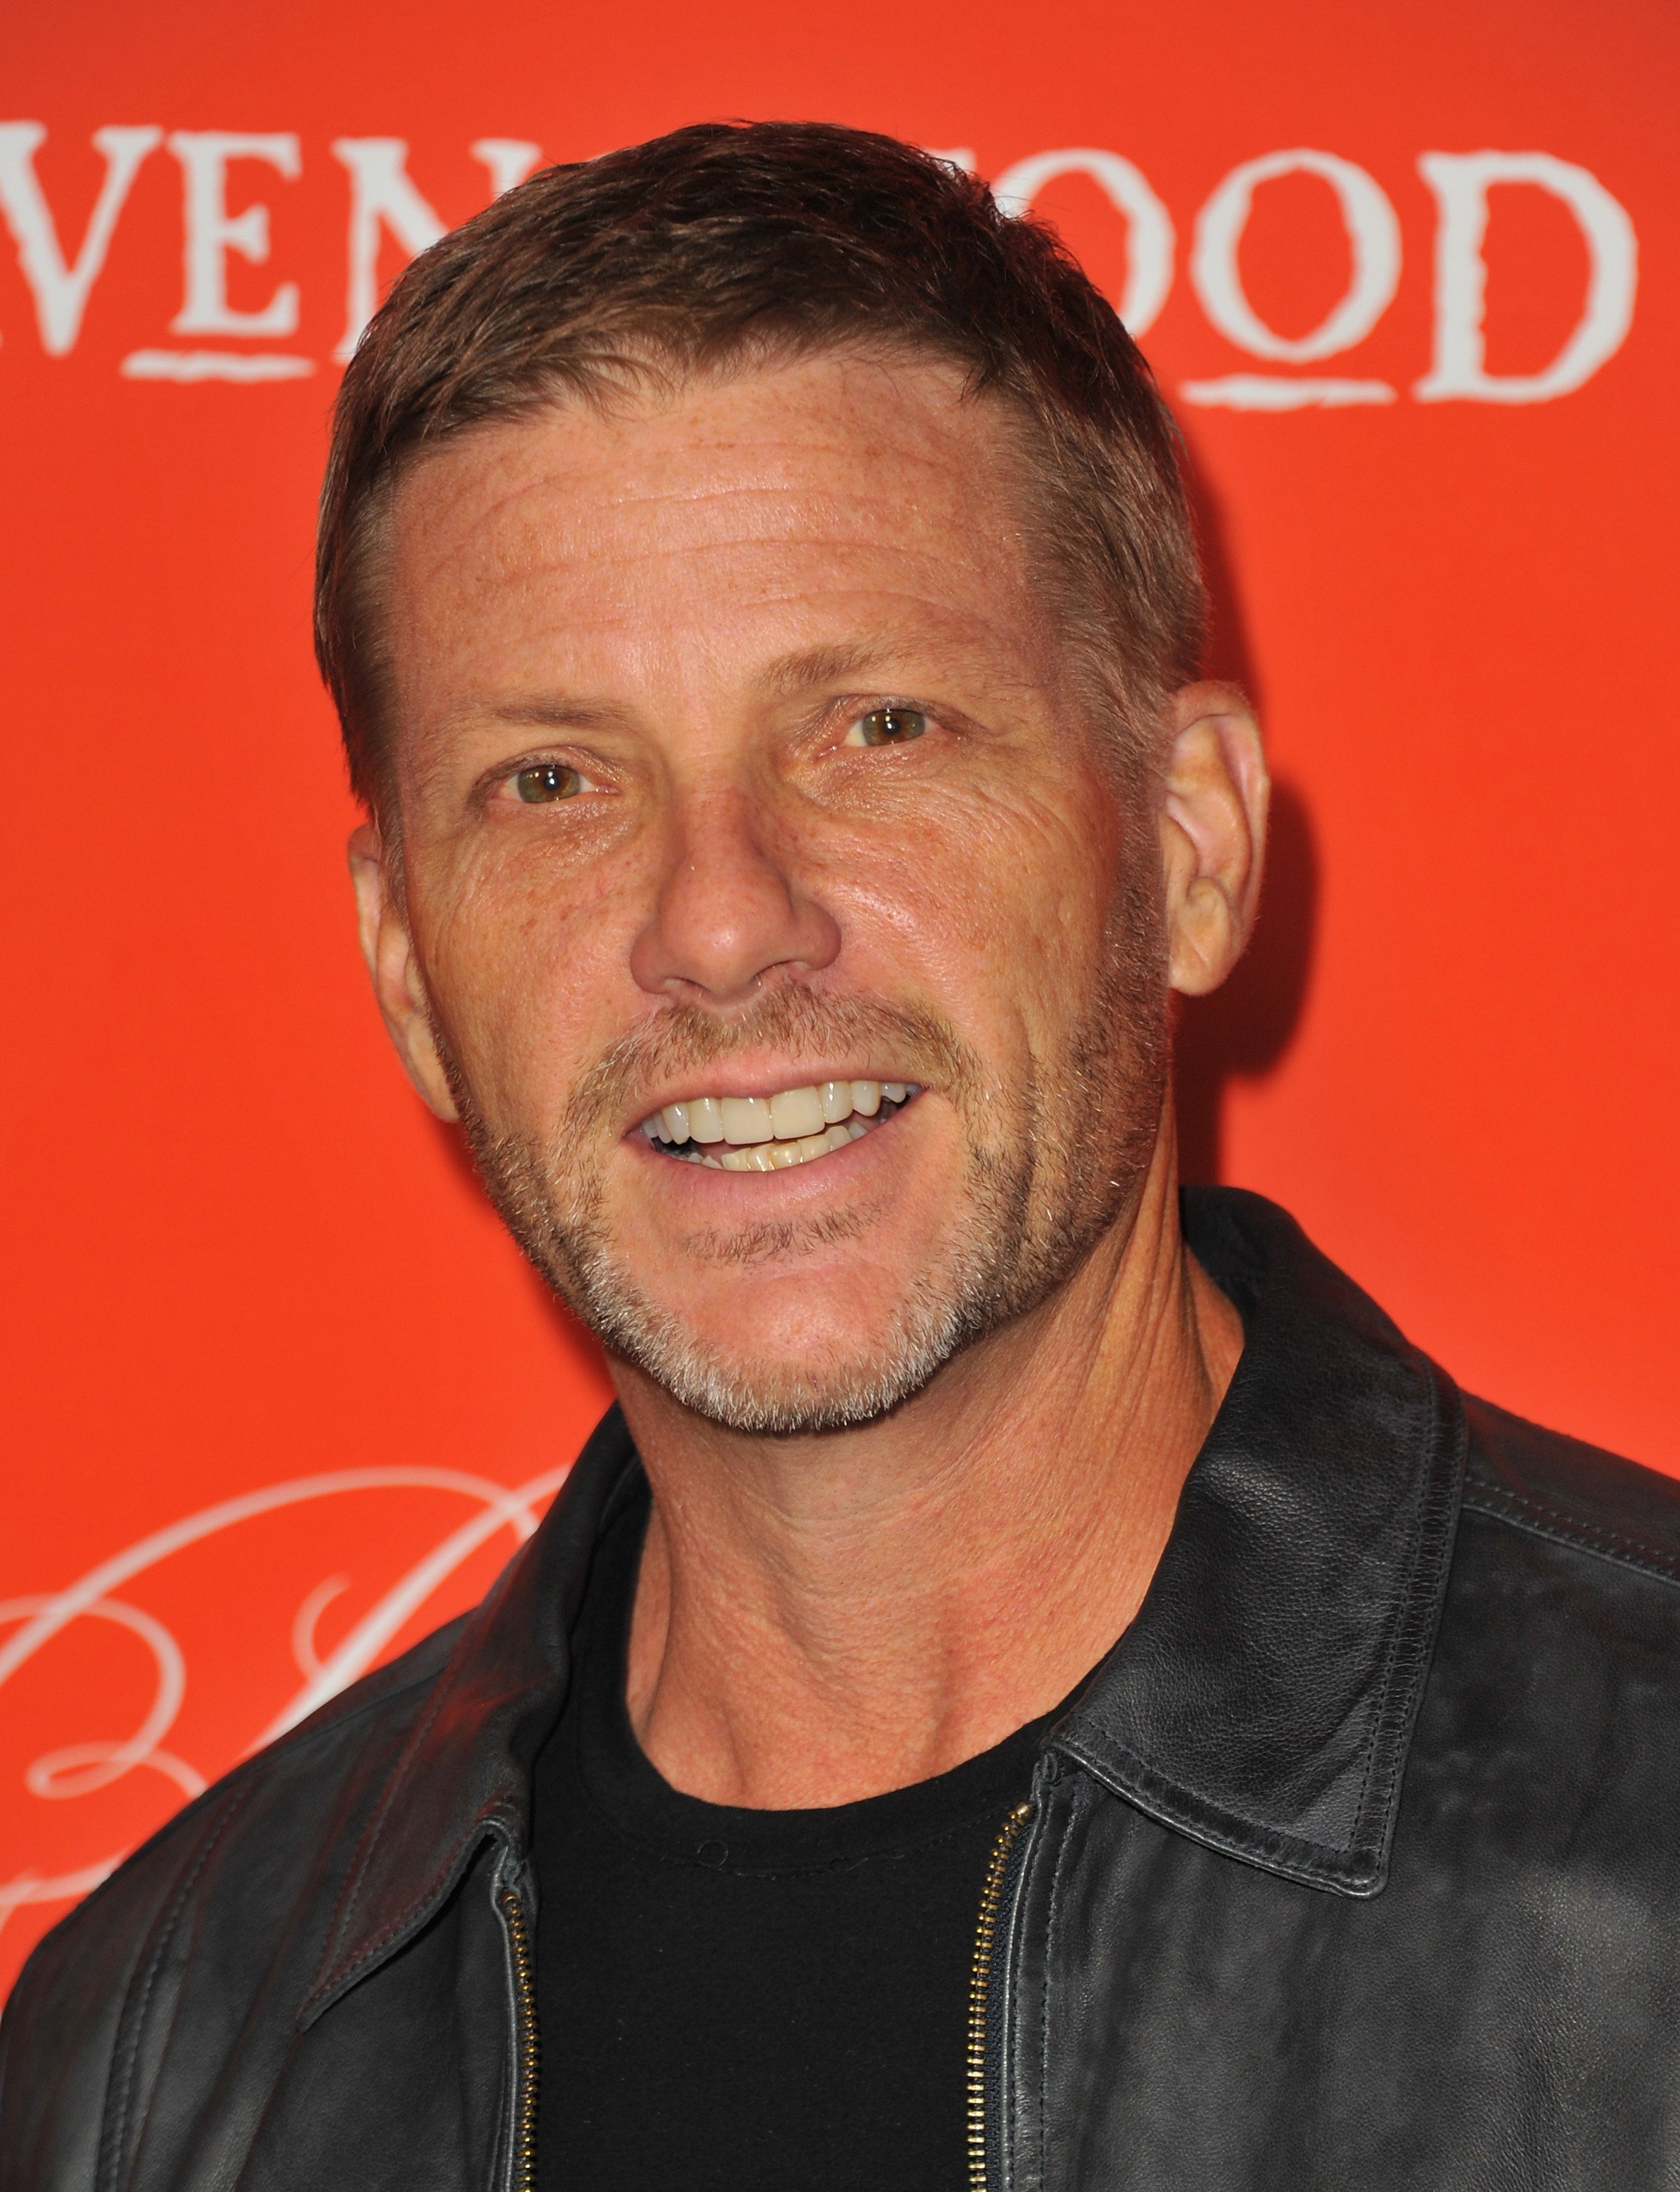  Doug Savant attends a screening of ABC Family's "Pretty Little Liars" Halloween episode at Hollywood Forever Cemetery on October 15, 2013, in Hollywood, California. | Source: Getty Images.